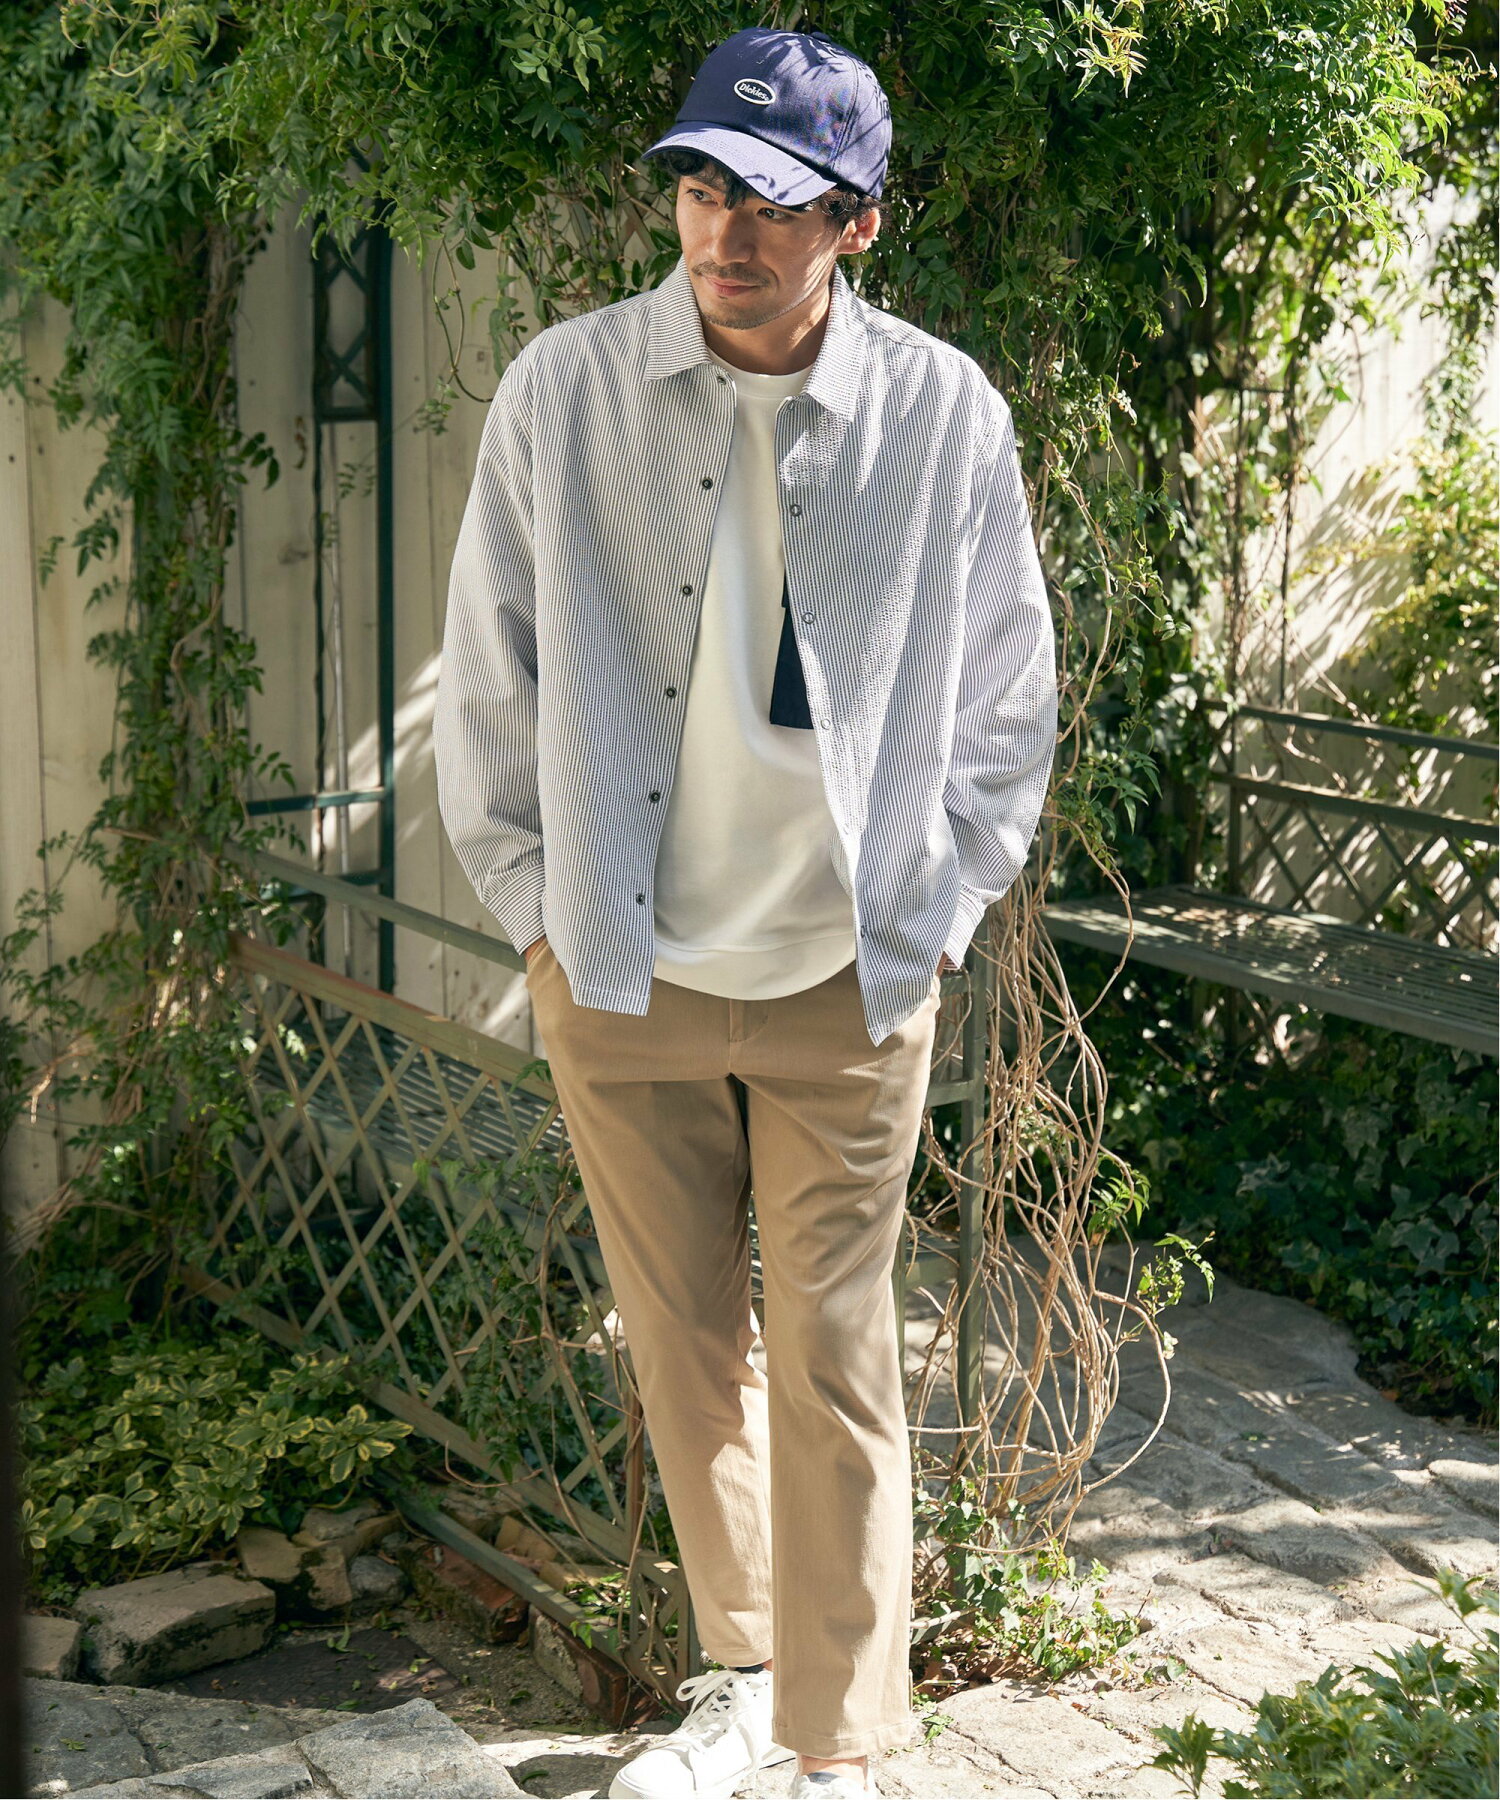 Dickies ディッキーズ ロゴワッペンキャップ